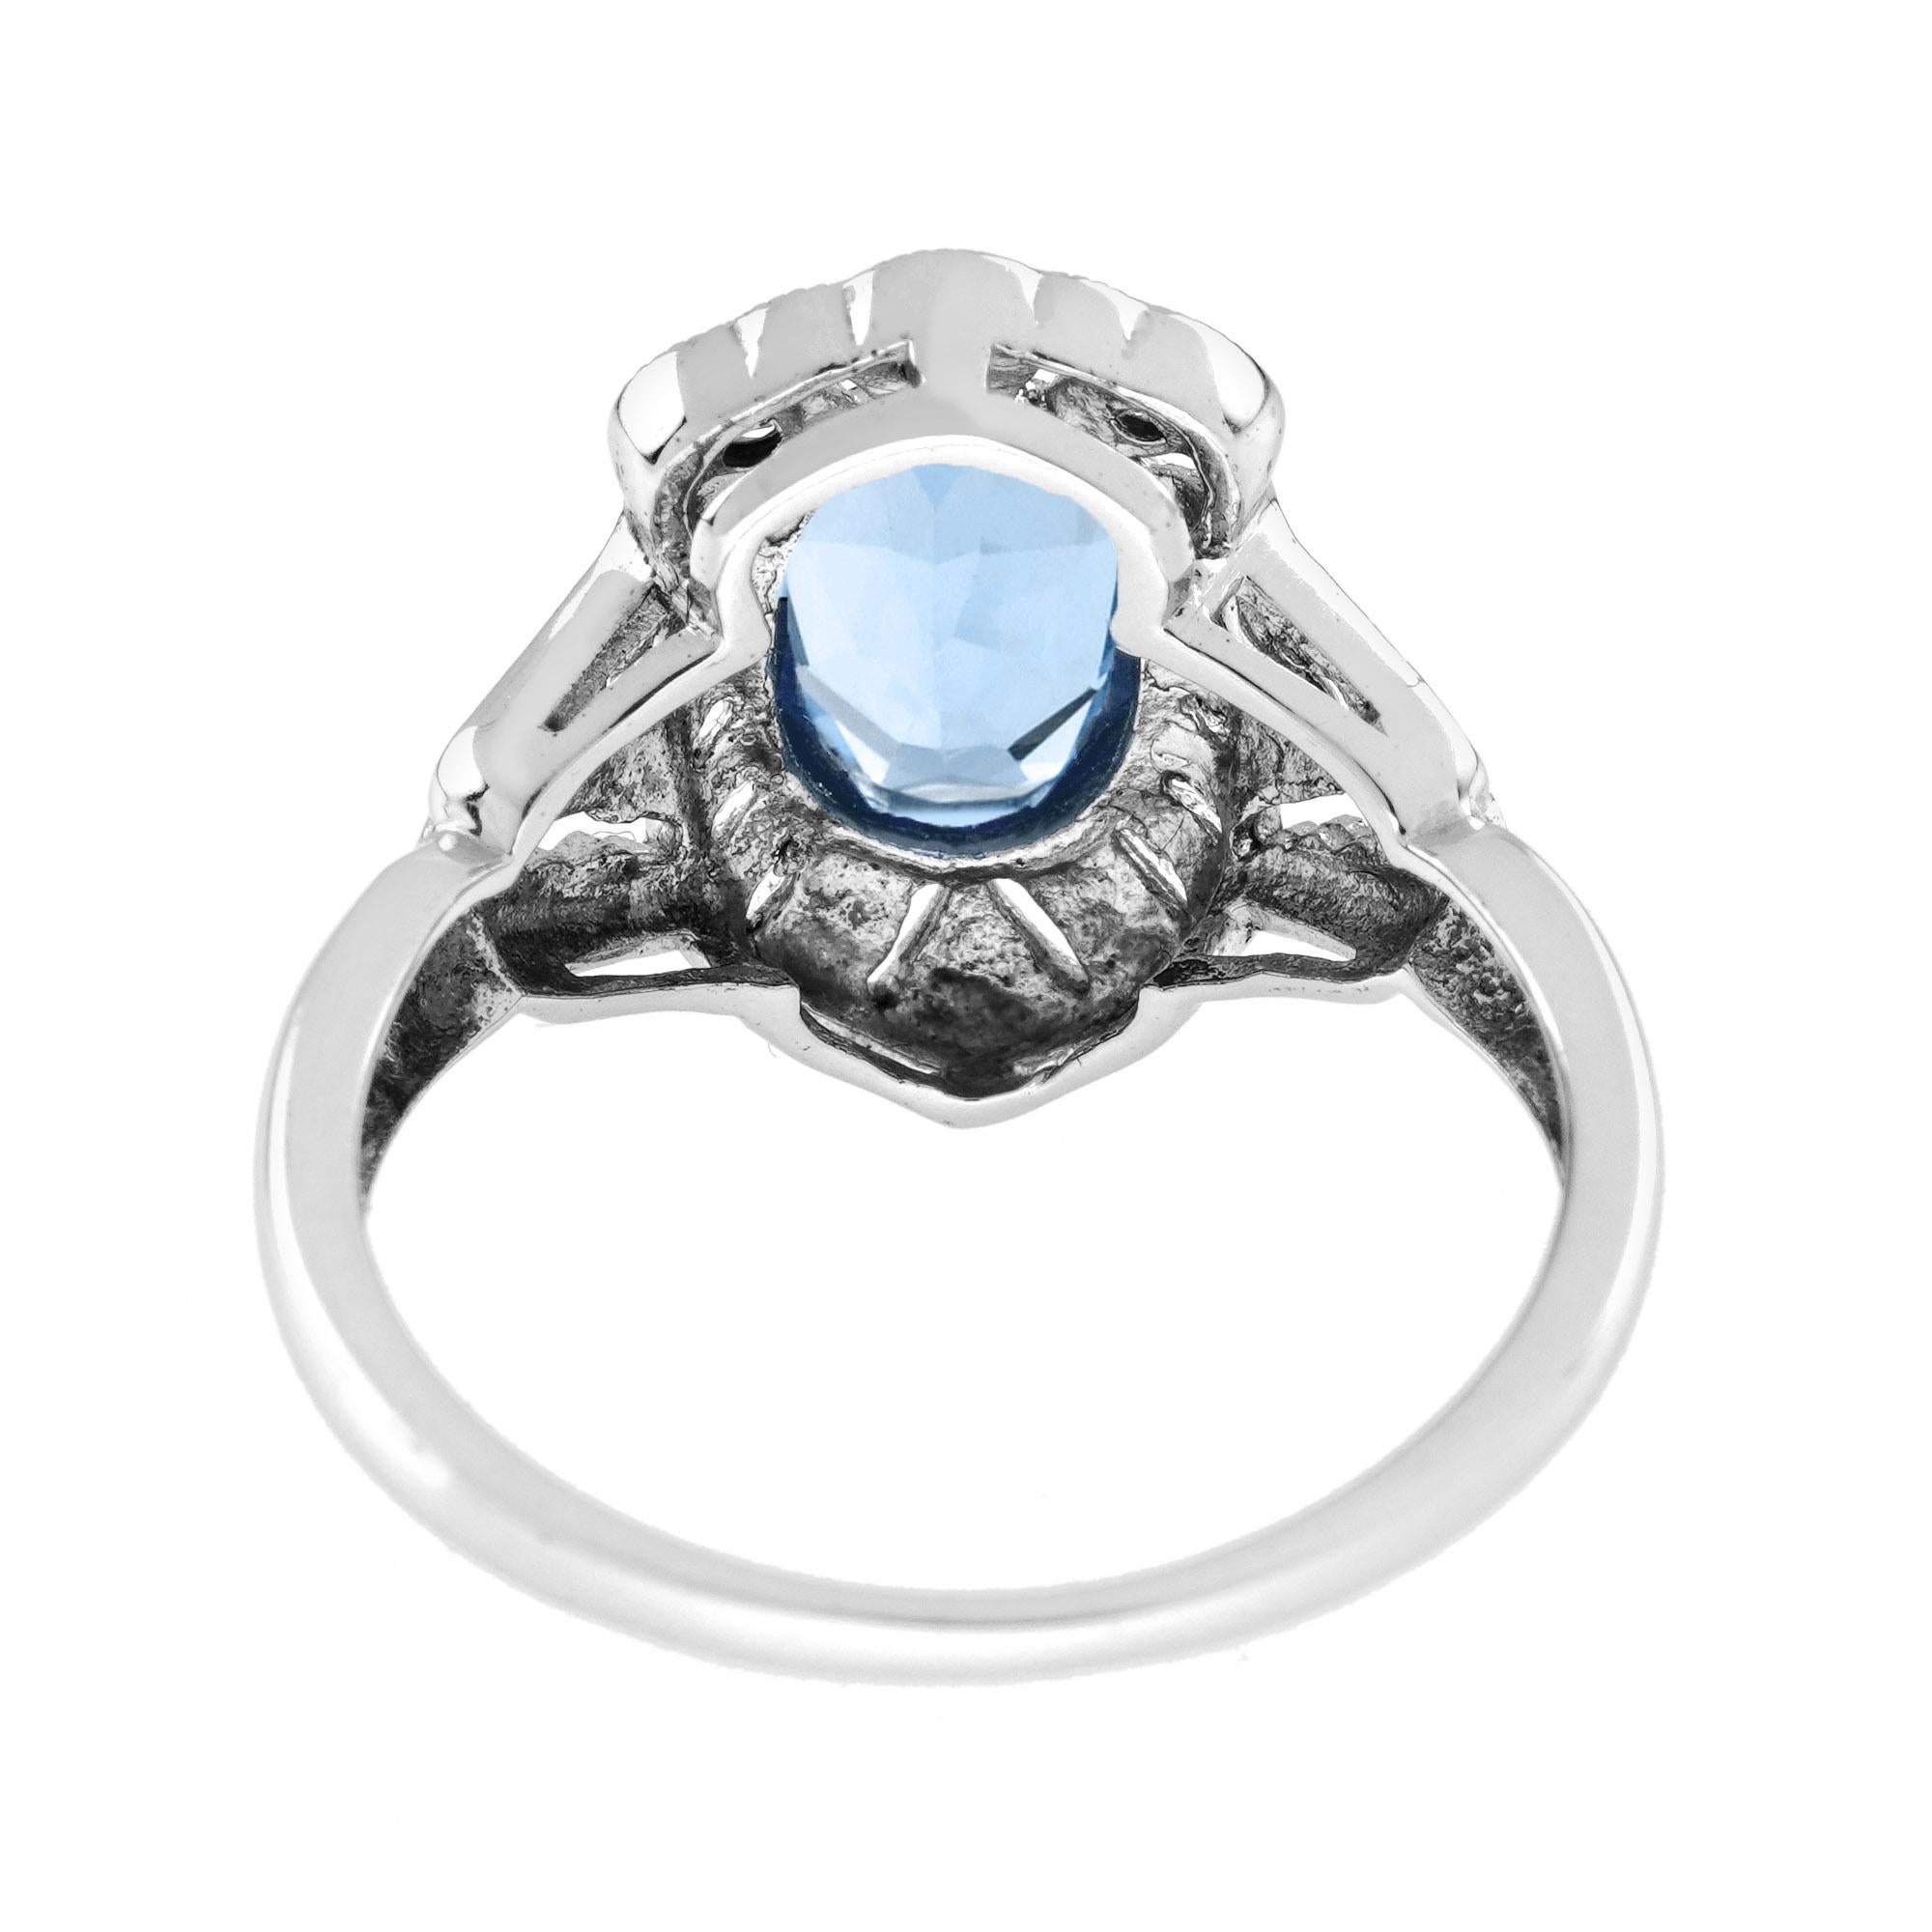 Women's 1.5 Ct. Aquamarine and Diamond Art Deco Style Engagement Ring in 14K White Gold For Sale